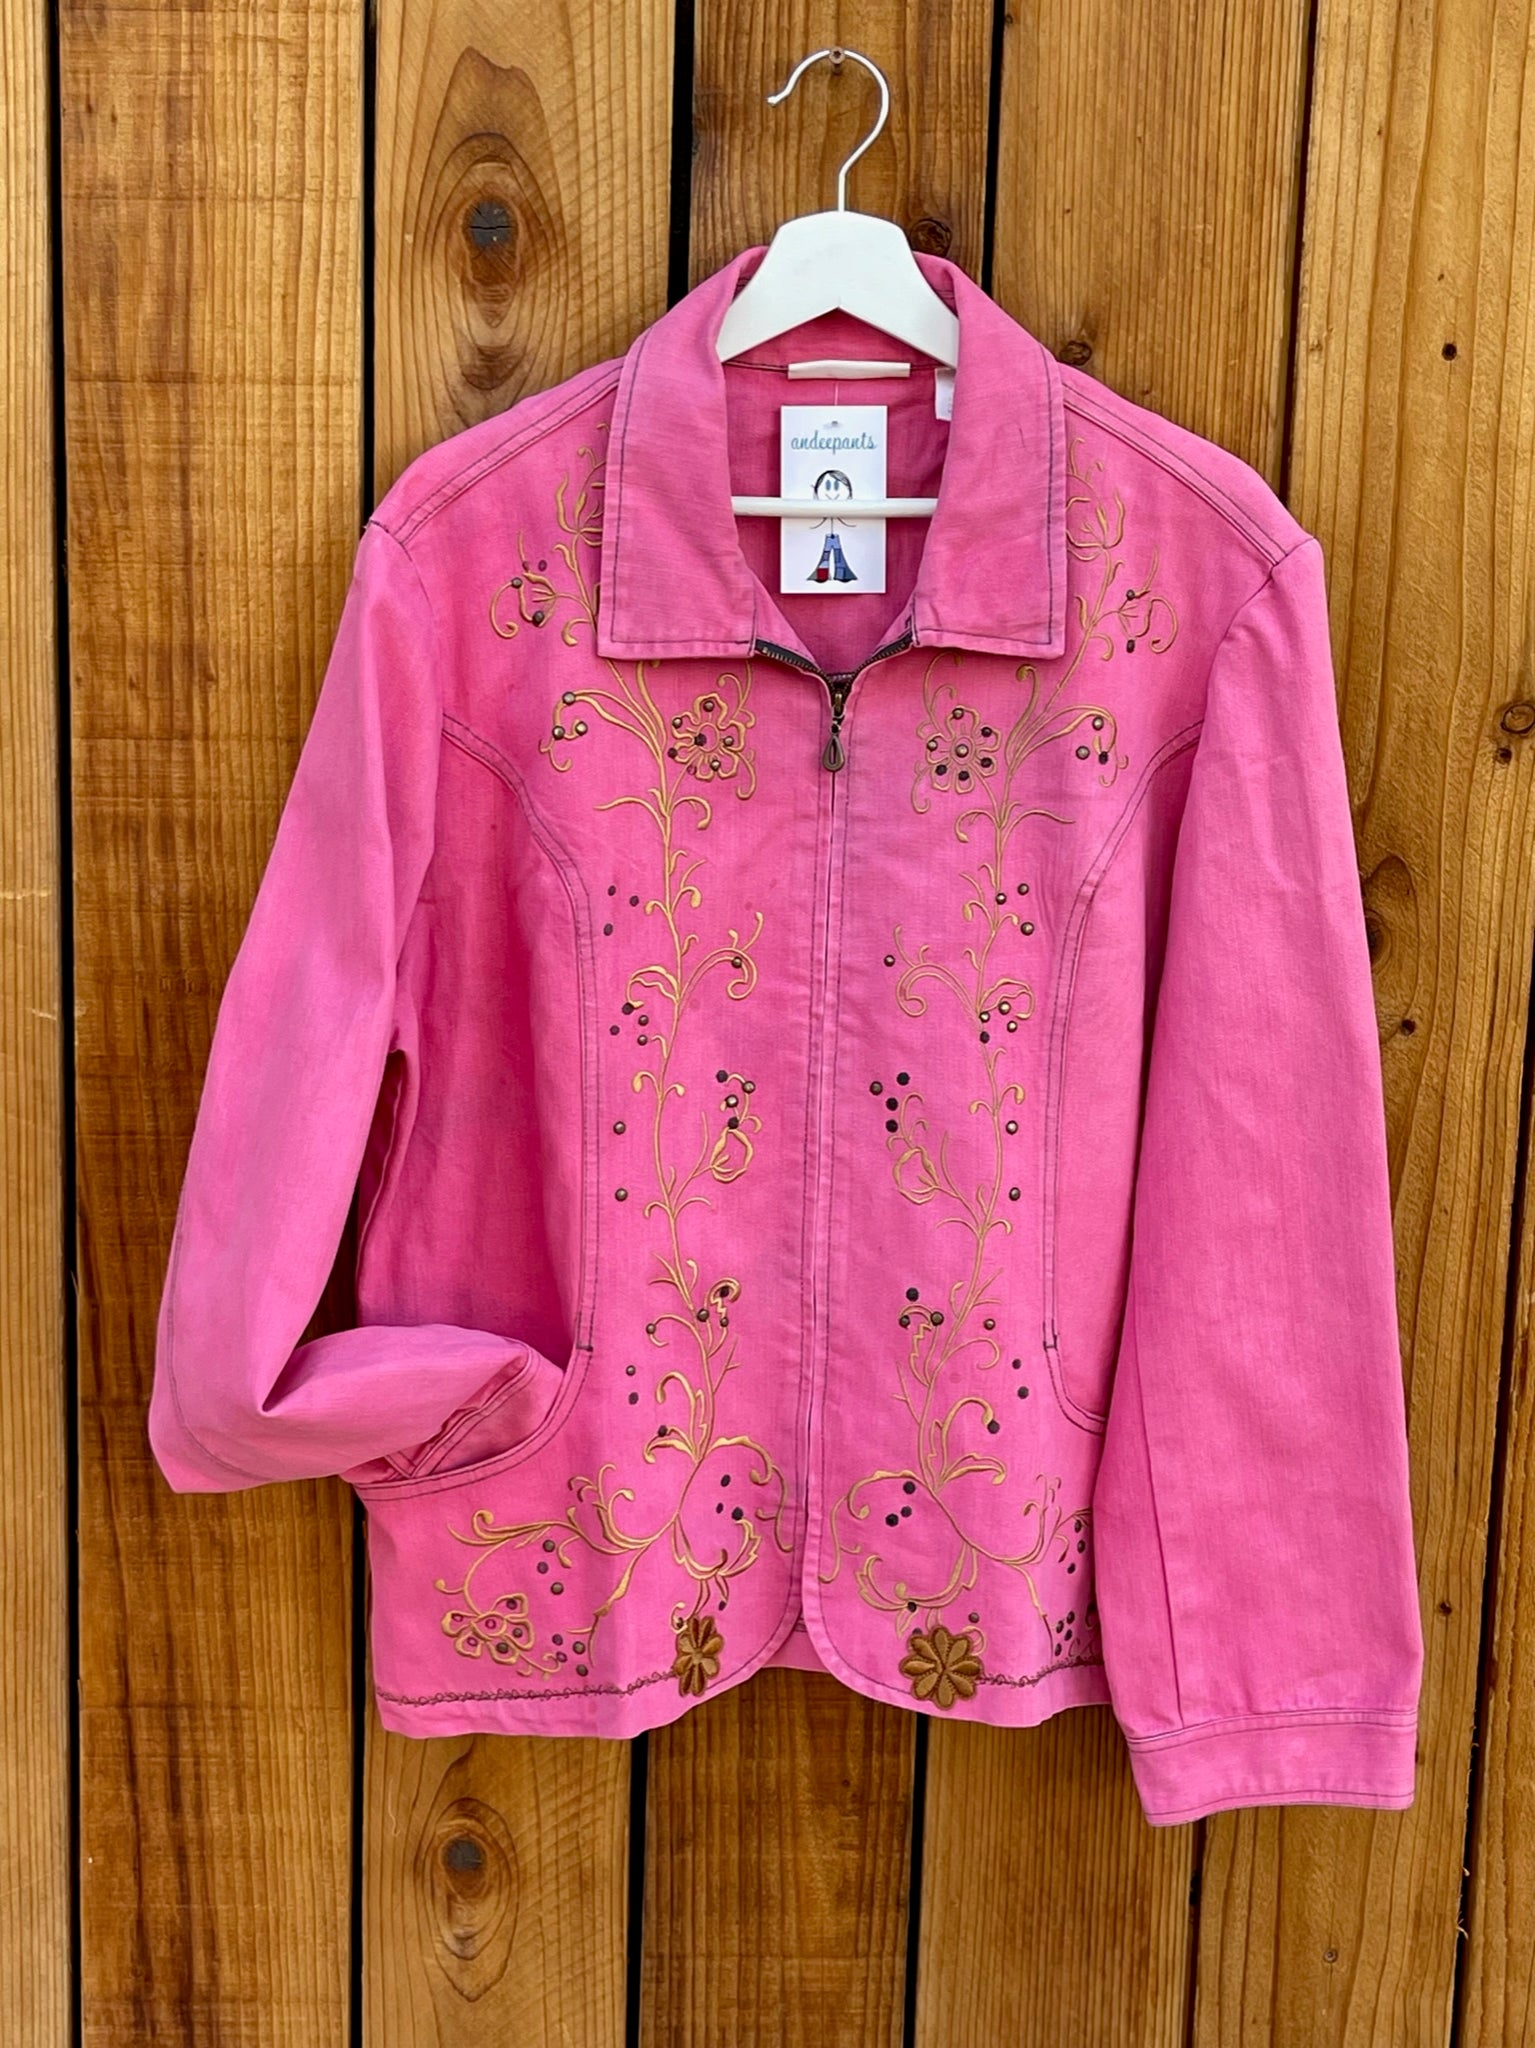 Ladies Jacket Pink and Gold